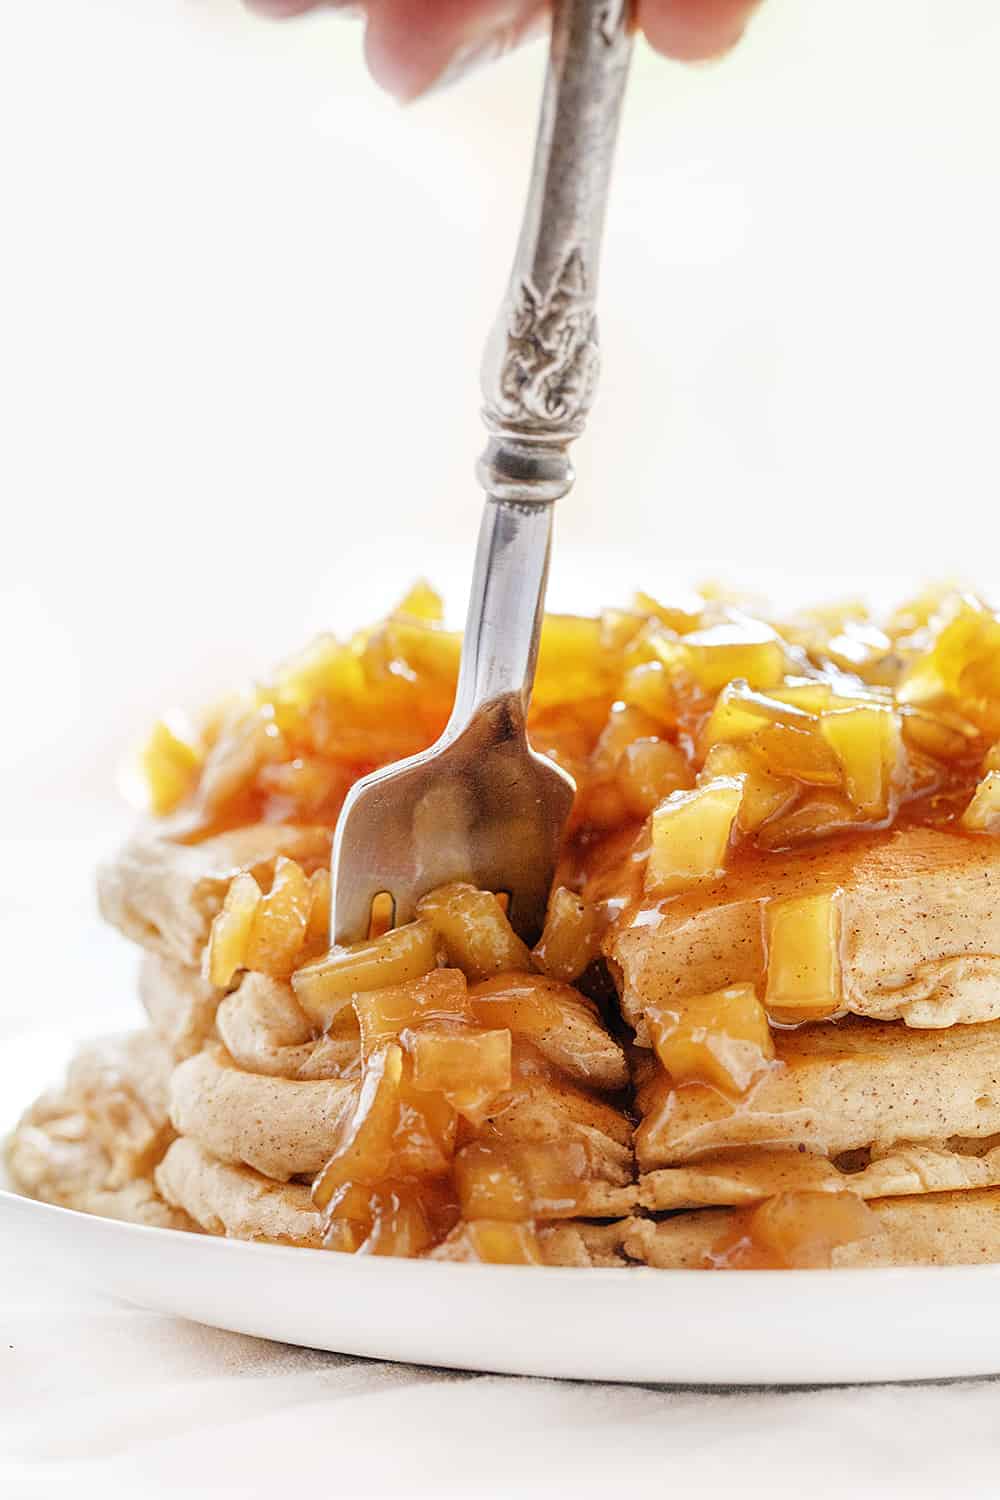 Forkful of Spiced Apple Pancakes